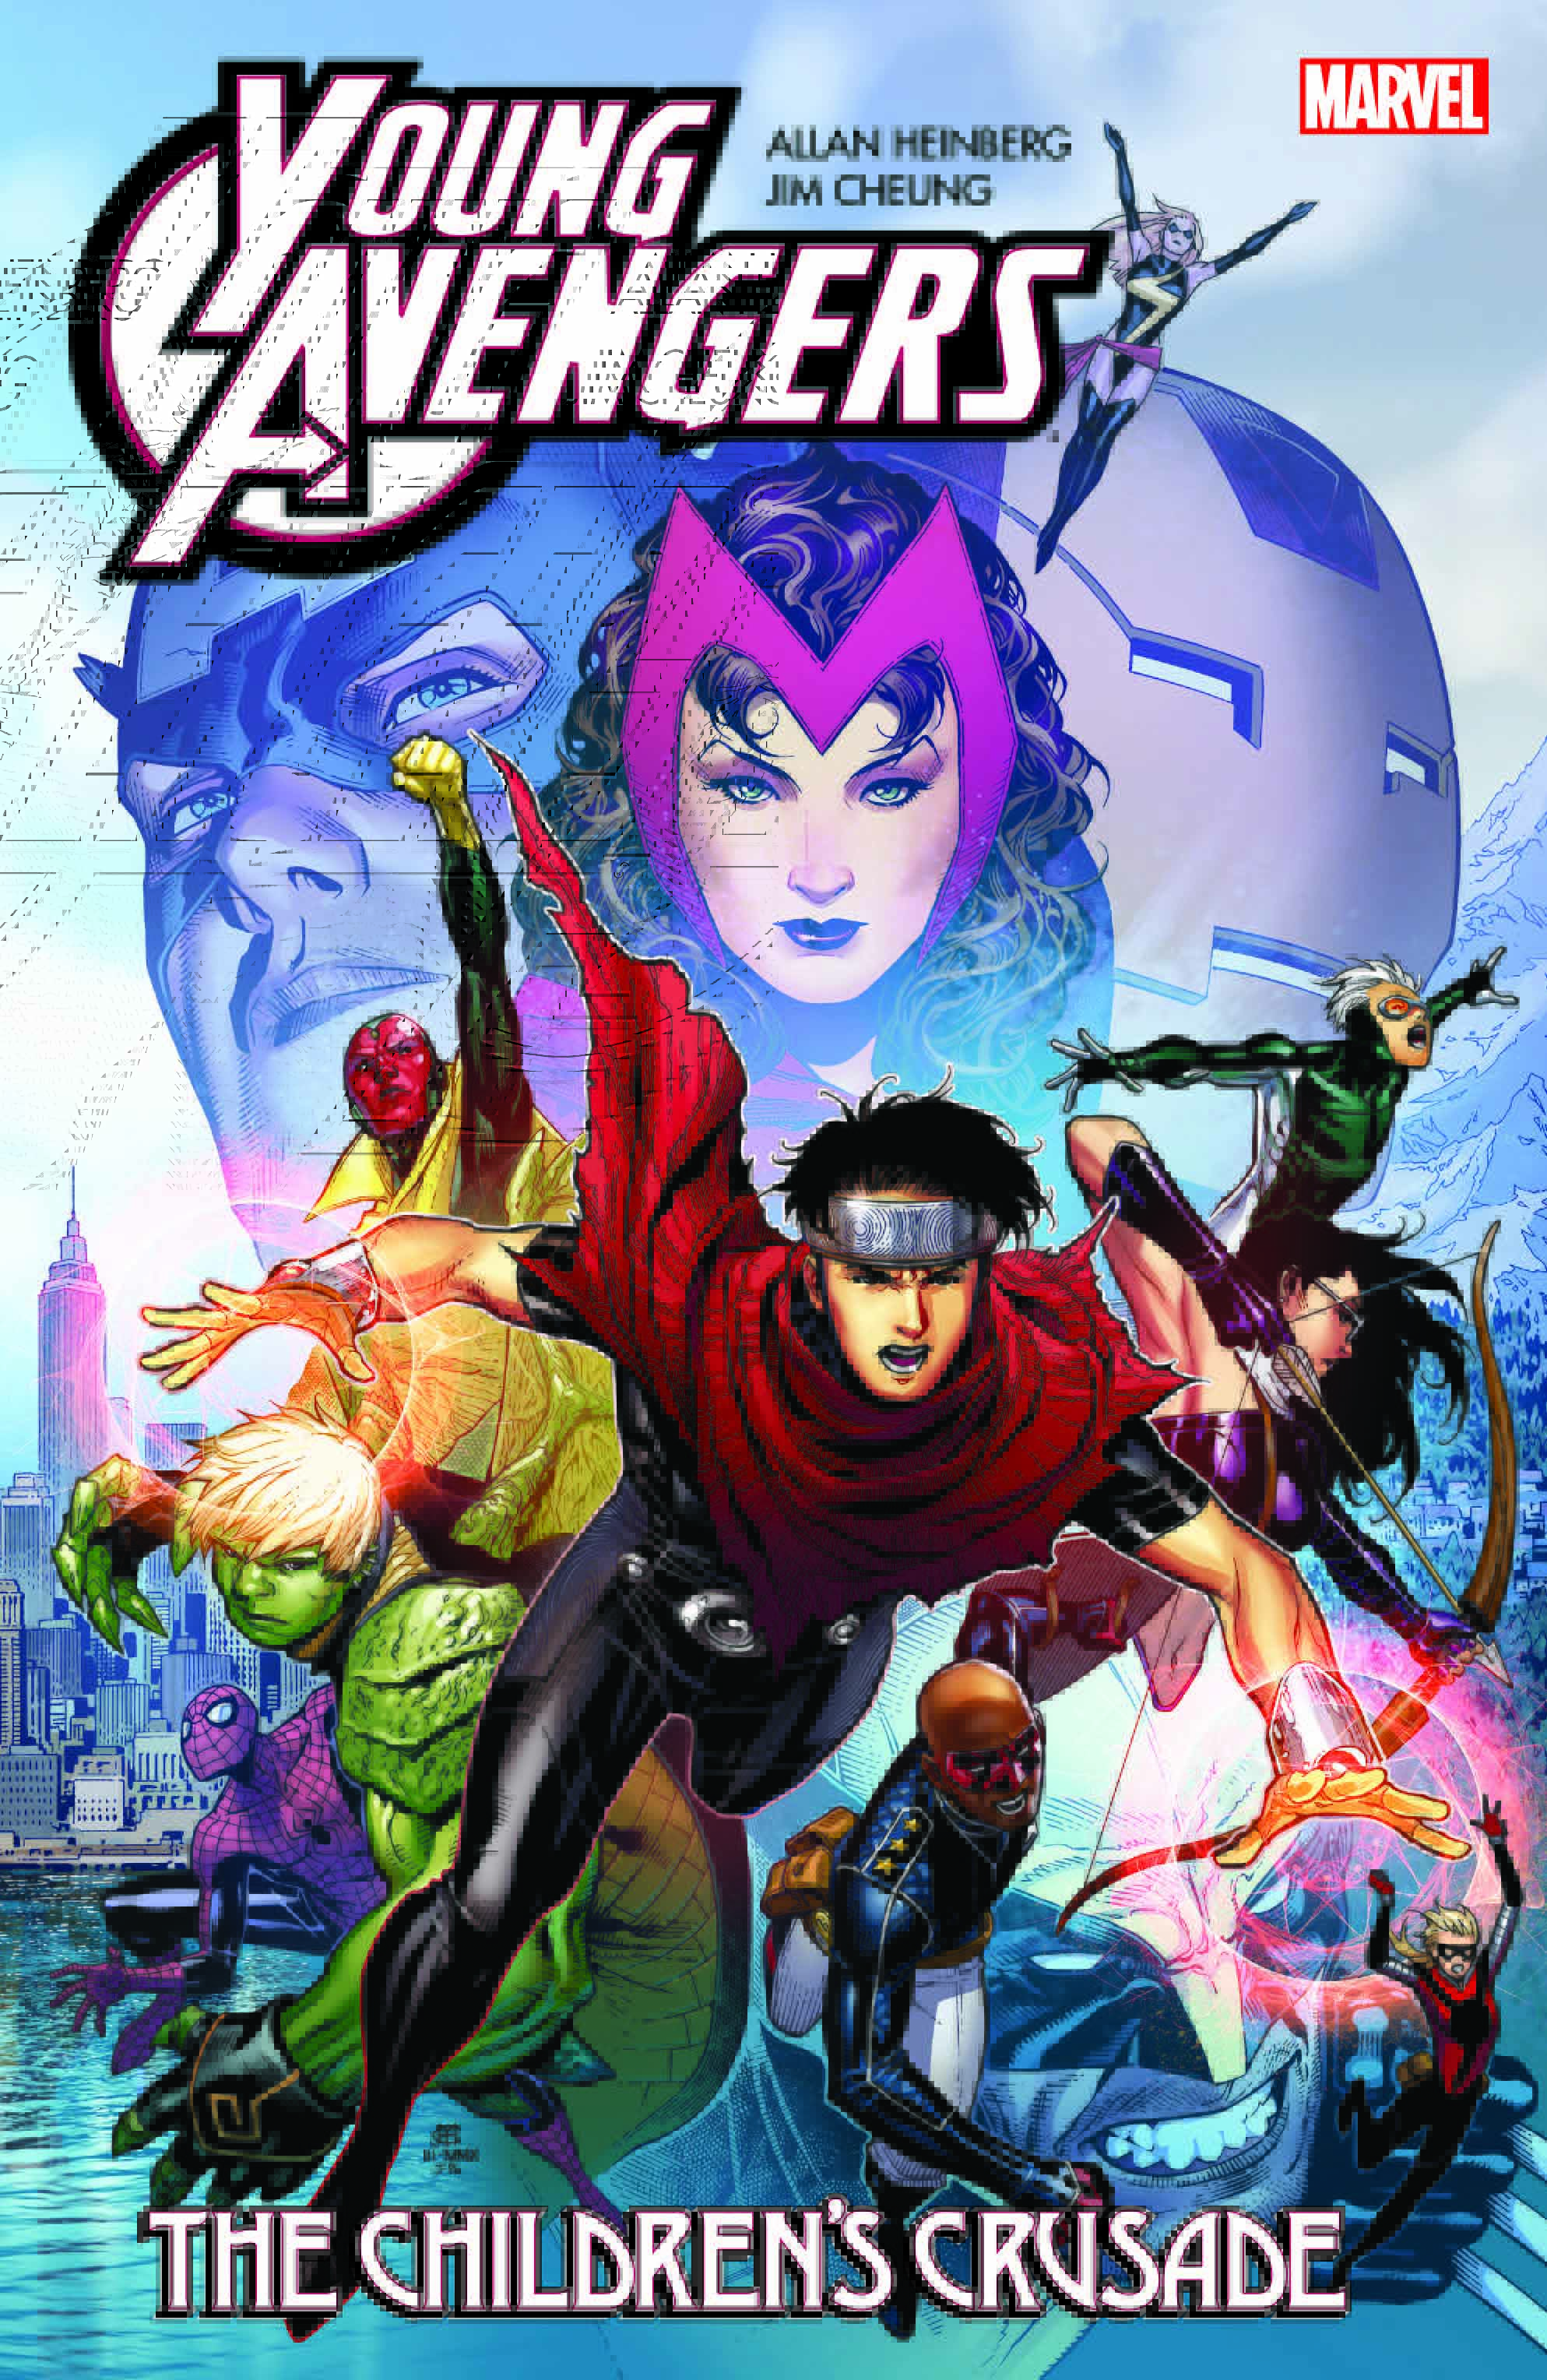 YOUNG AVENGERS BY ALLAN HEINBERG & JIM CHEUNG: THE CHILDREN'S CRUSADE TPB (Trade Paperback)